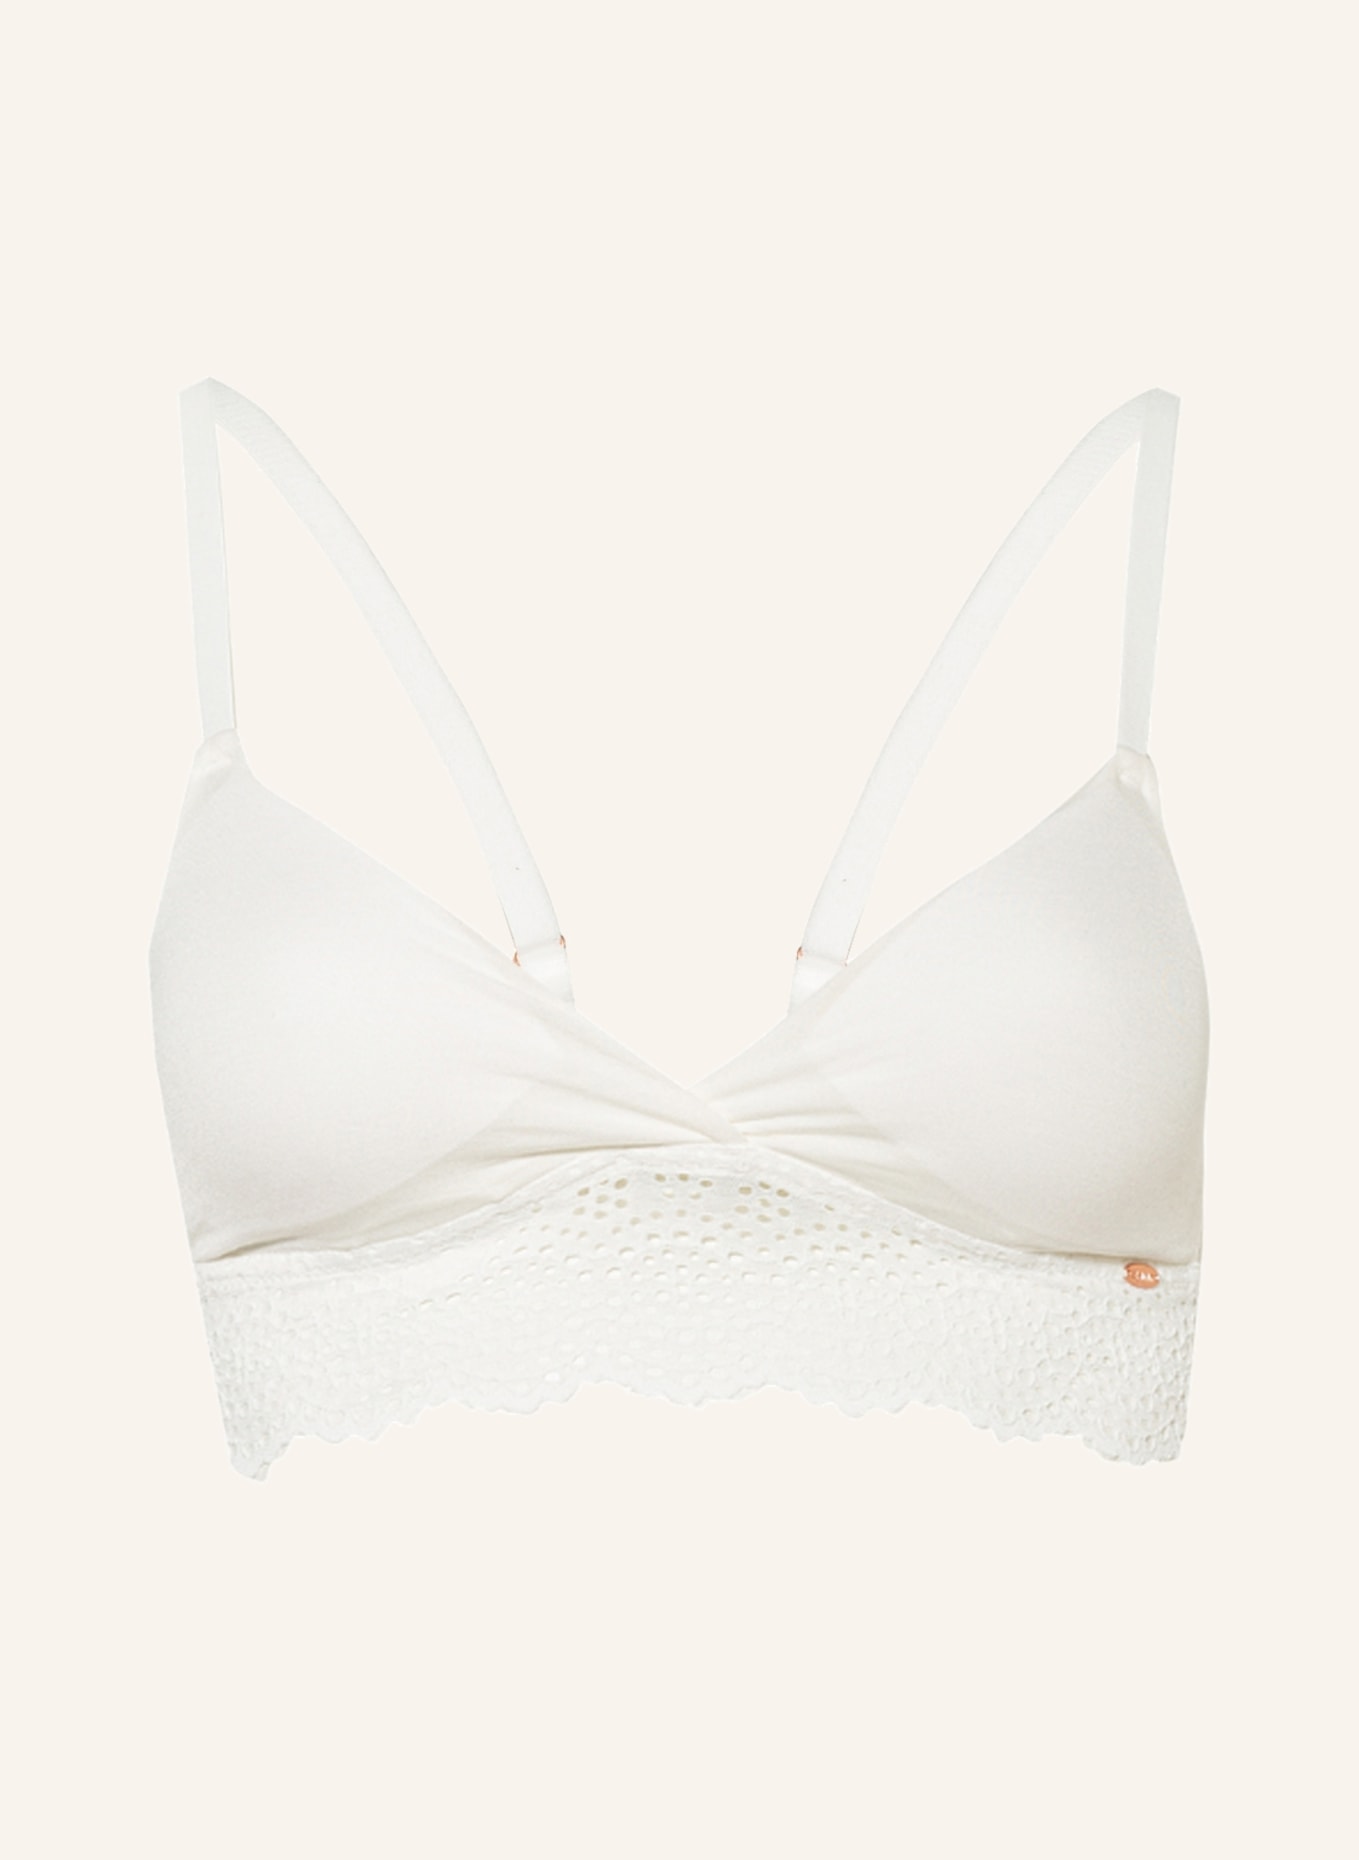 Skiny Triangel-BH EVERY DAY BAMBOO LACE, Farbe: WEISS (Bild 1)